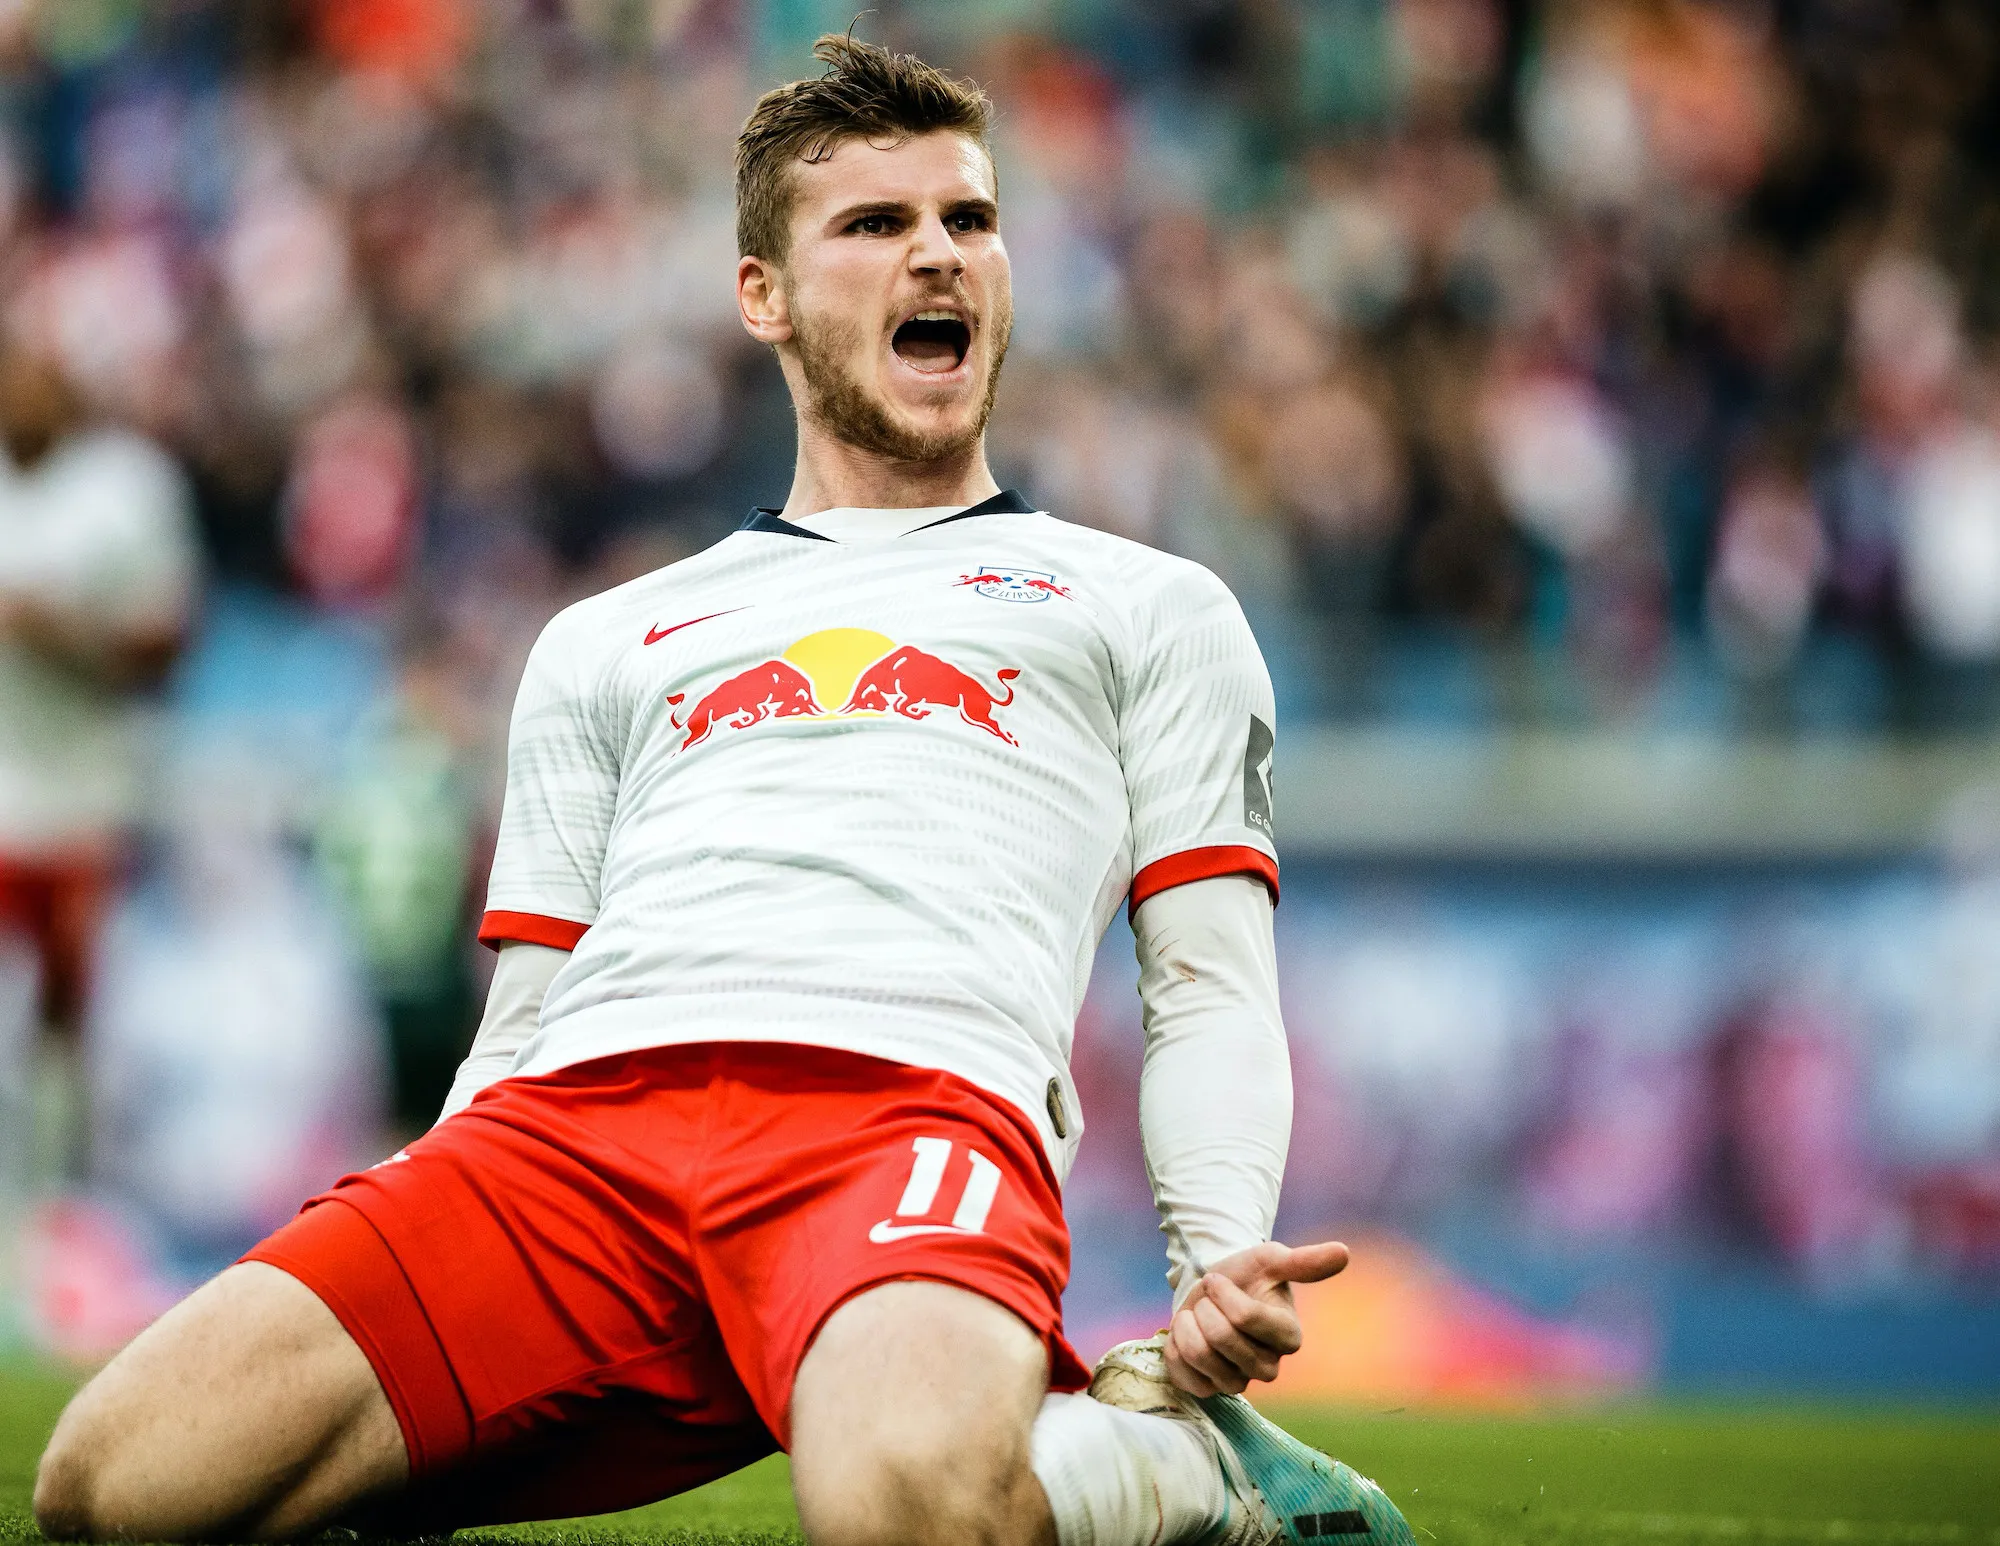 Image of player Timo Werner celebrating victory on the field